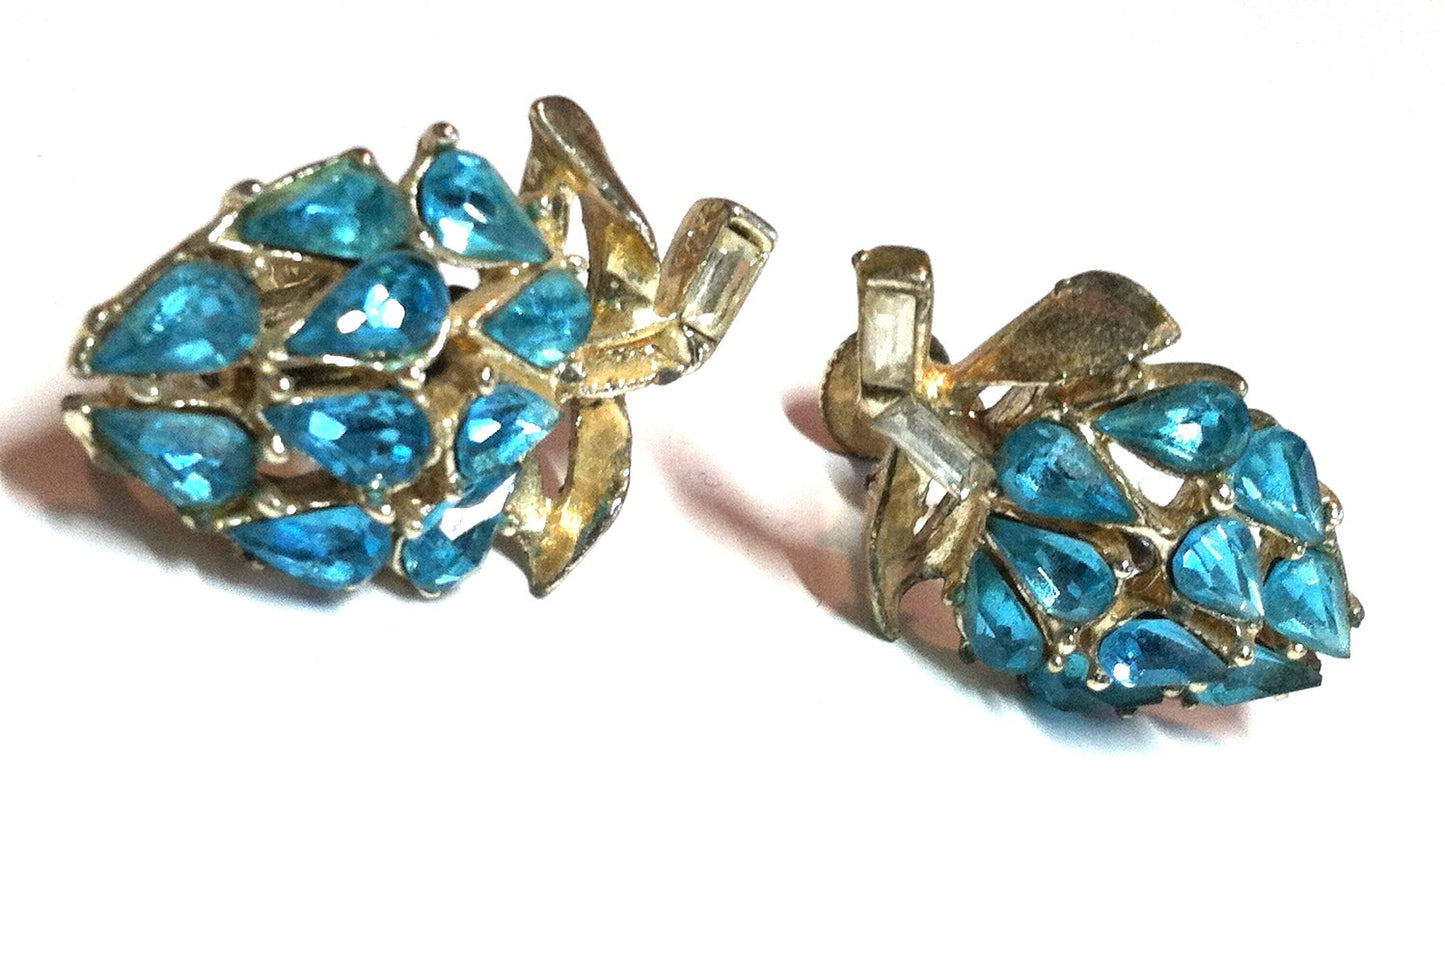 Bright Turquoise Blue Rhinestone Cluster Clip Earrings circa 1960s Dorothea's Closet Vintage Jewelry 